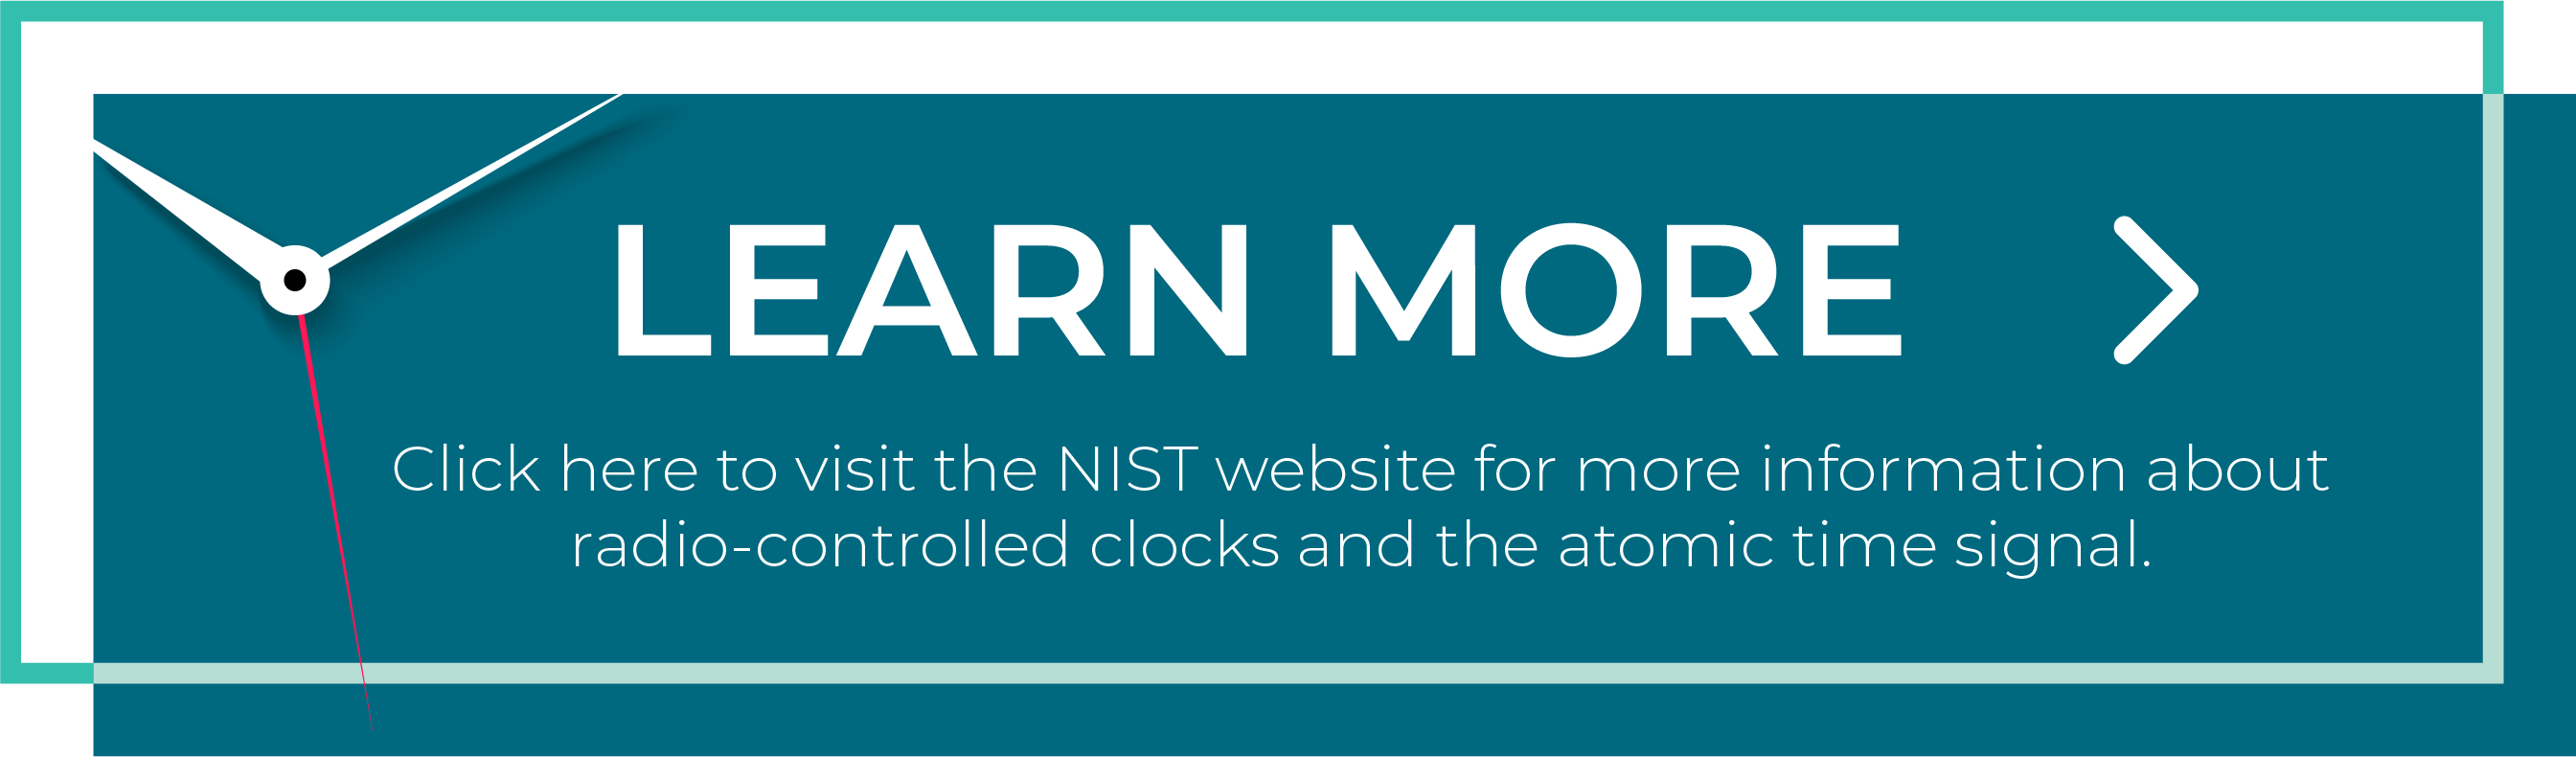 Click here to visit the NIST website for more information about radio-controlled clocks and the atomic time signal.